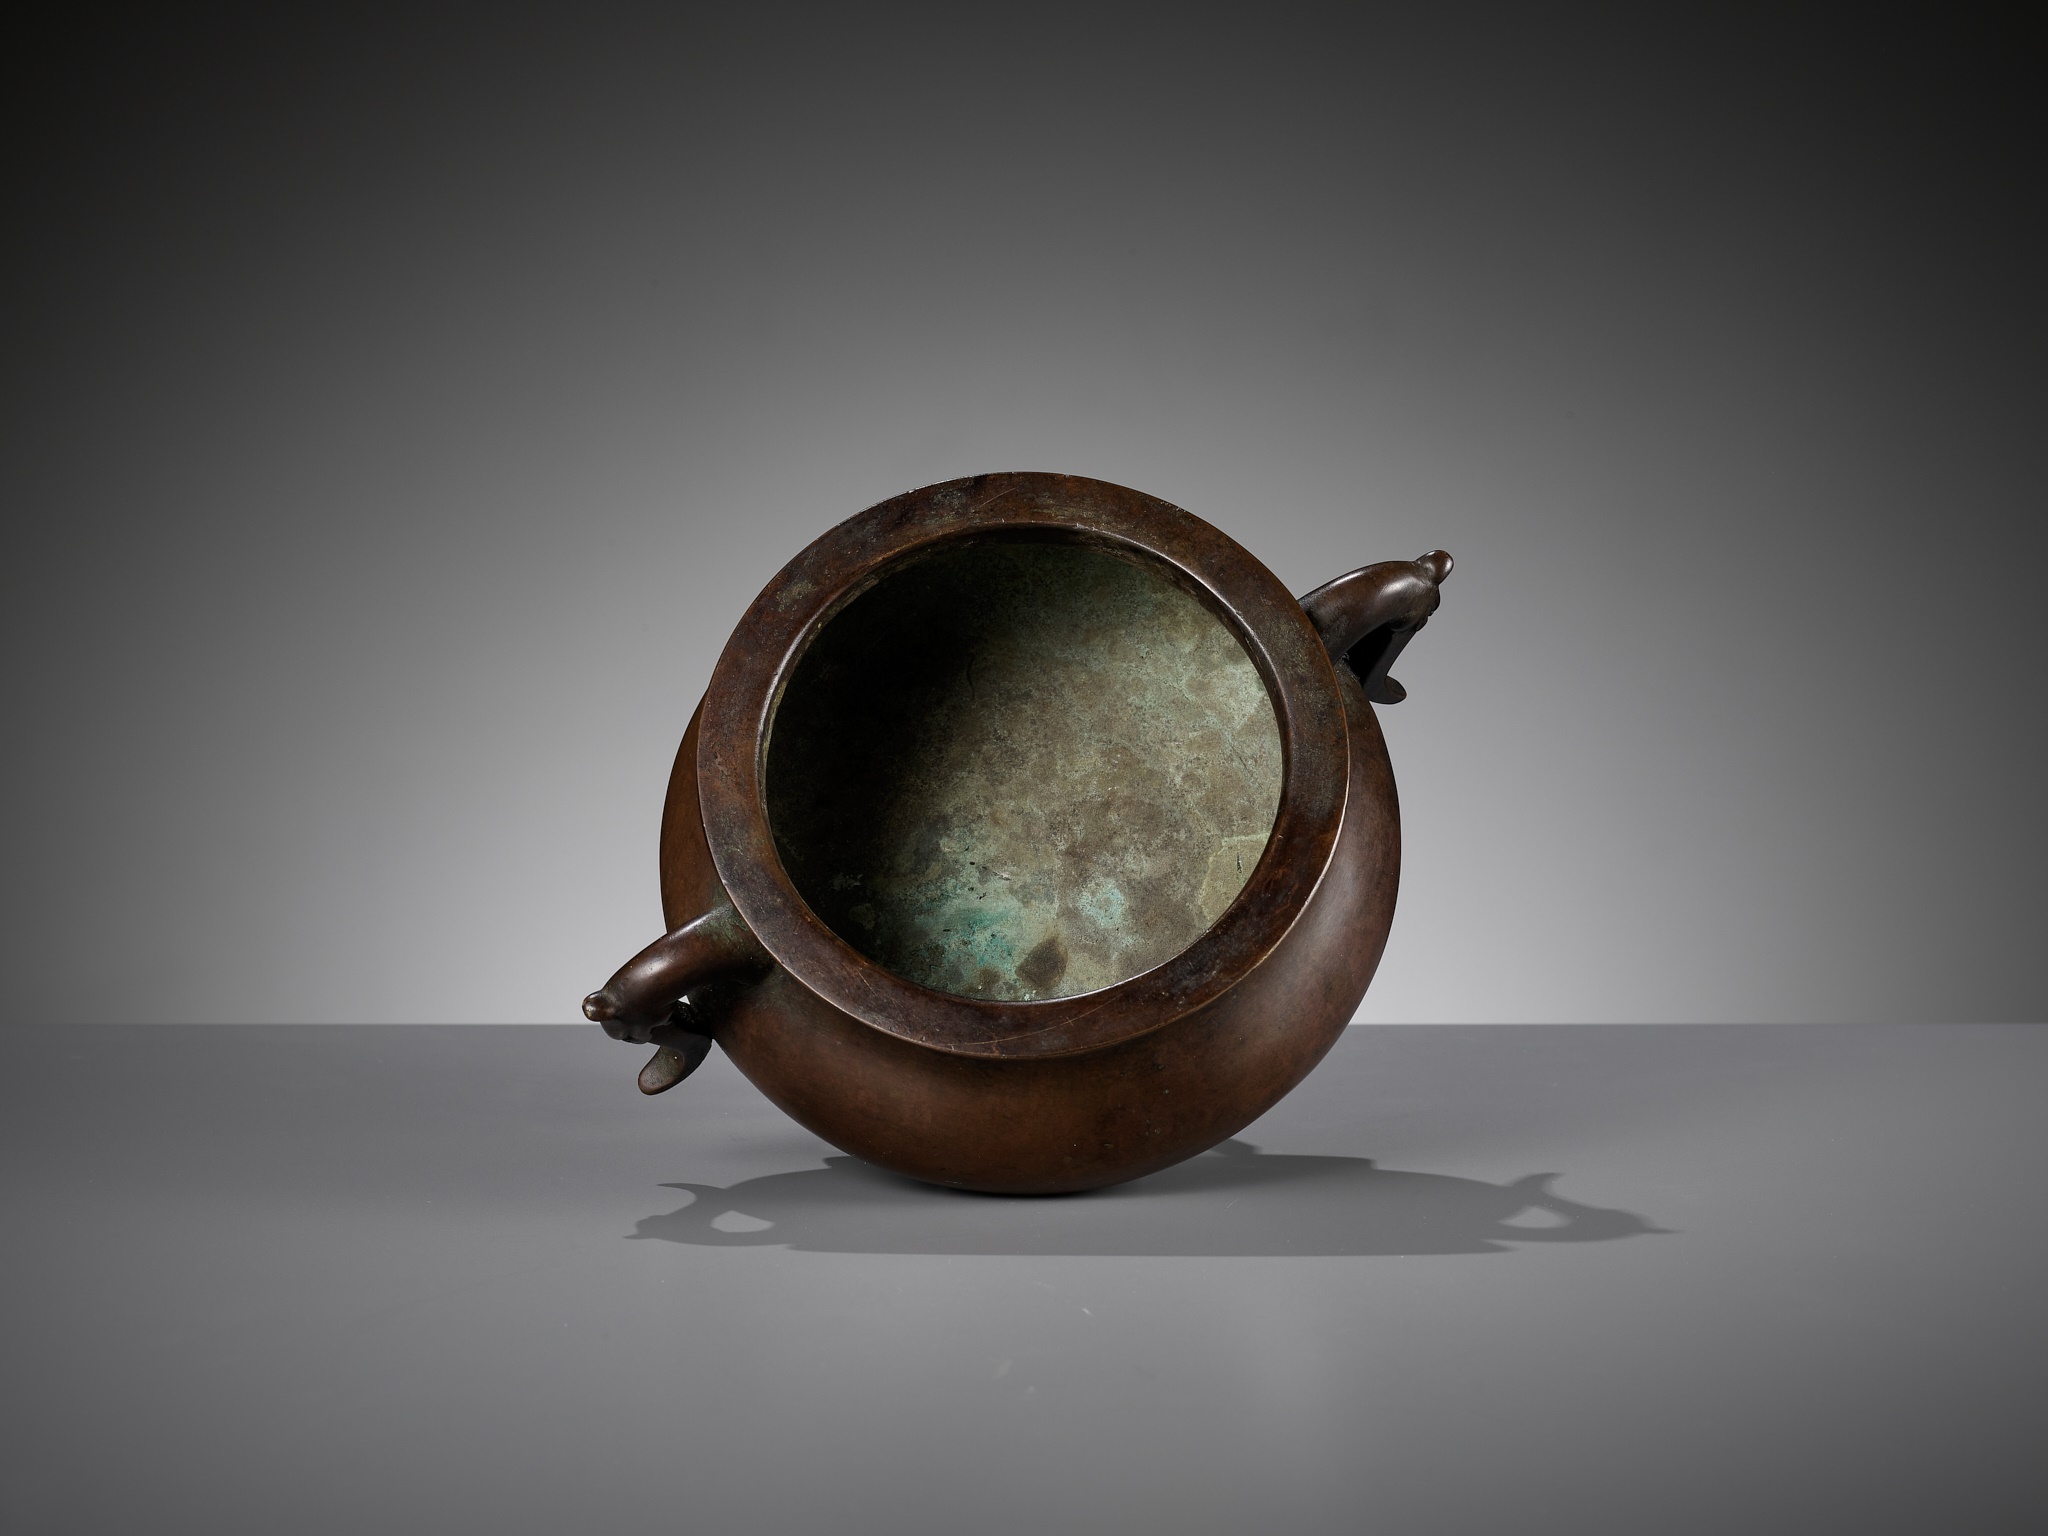 A BRONZE CENSER WITH A ZITAN WOOD COVER AND A WHITE JADE FINIAL, 17TH-18TH CENTURY - Image 15 of 16